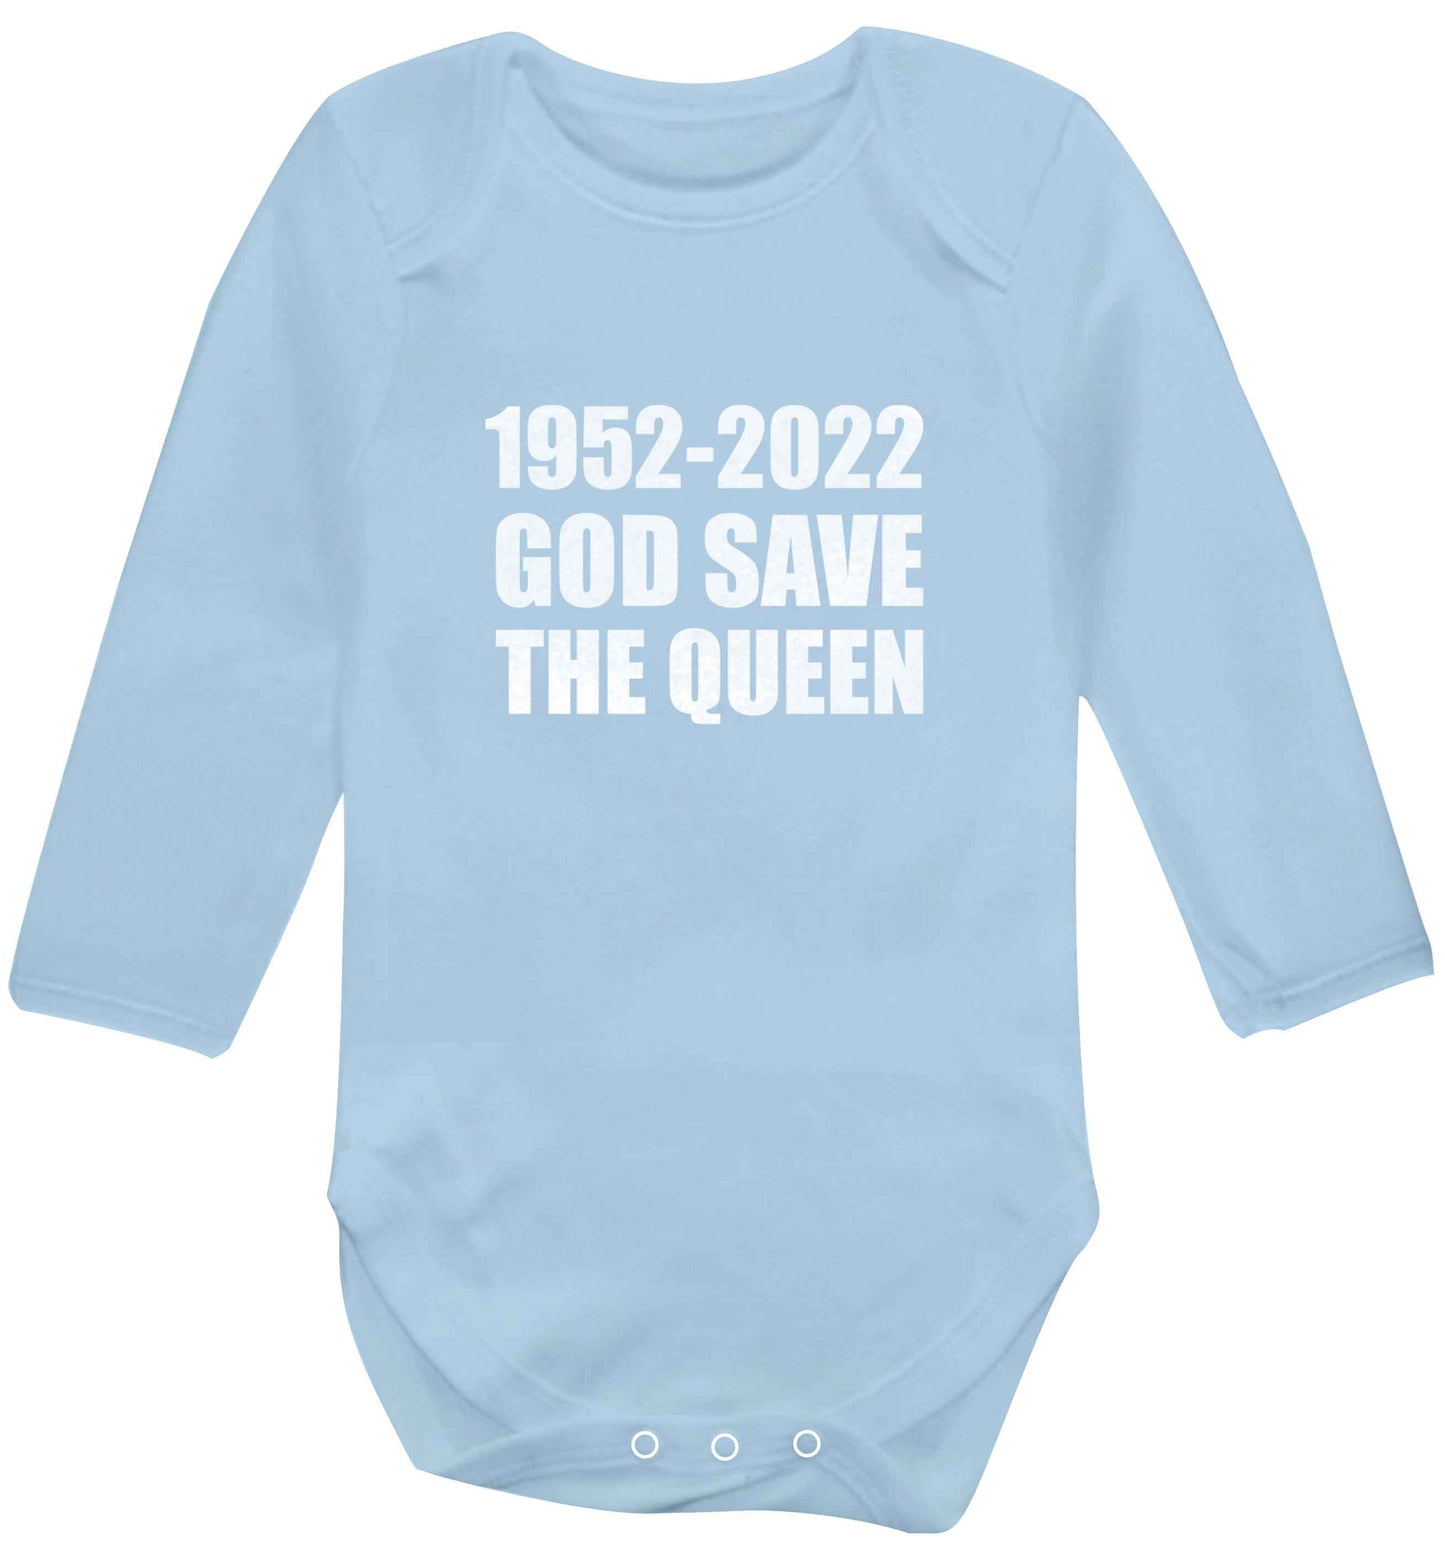 God save the queen baby vest long sleeved pale blue 6-12 months